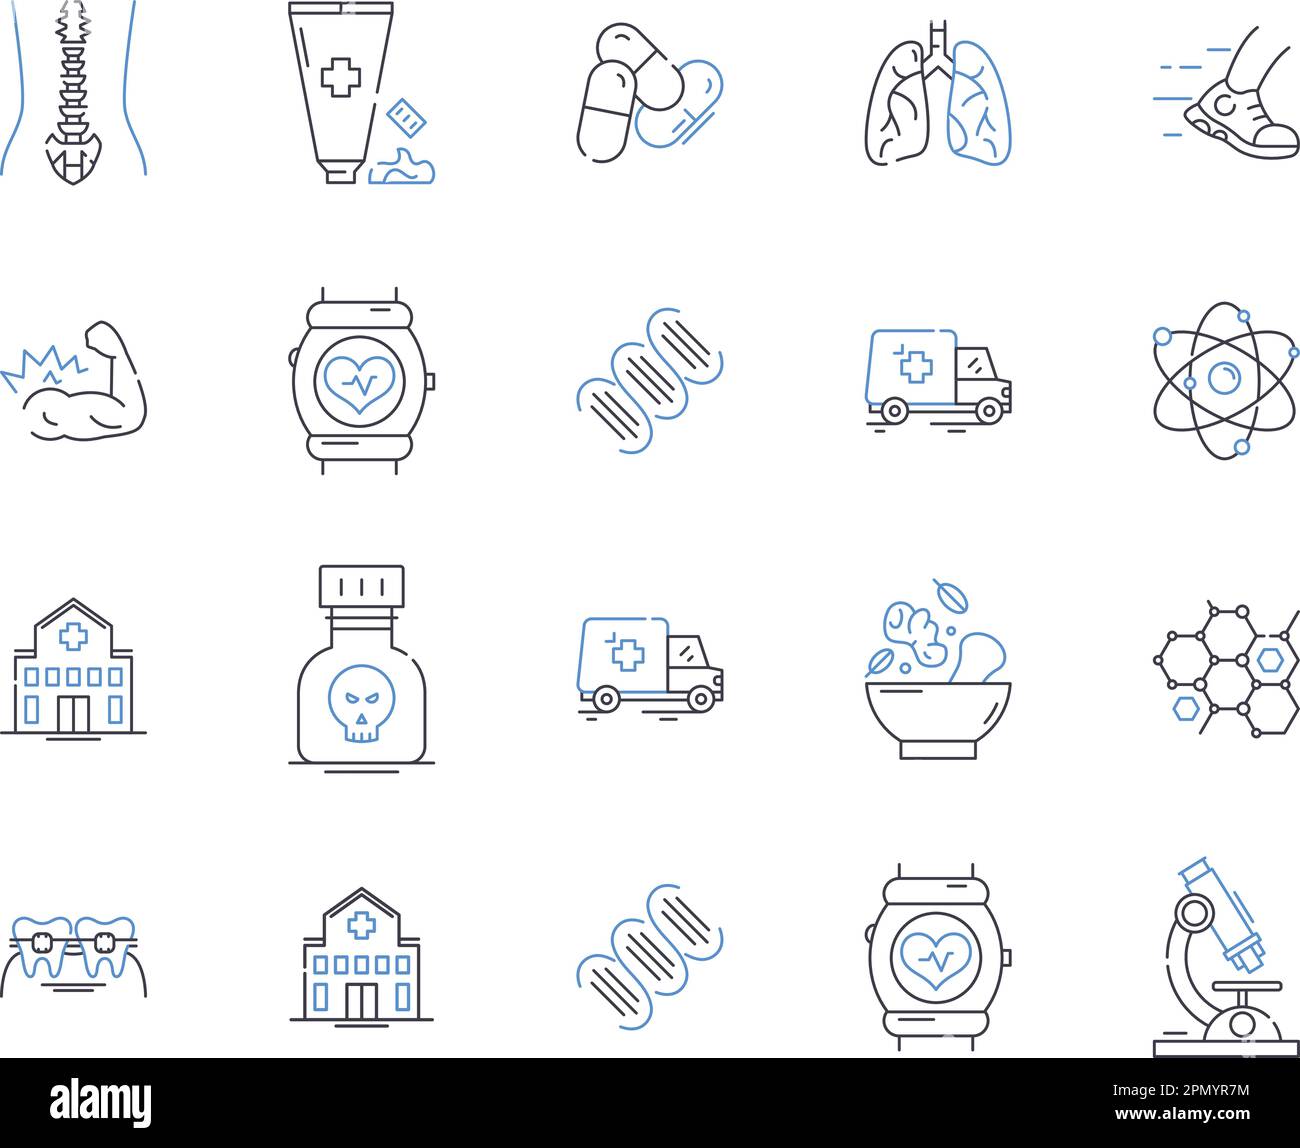 Health therapy outline icons collection. Therapy, Health, Medical, Mental, Wellness, Care, Treatment vector and illustration concept set Stock Vector